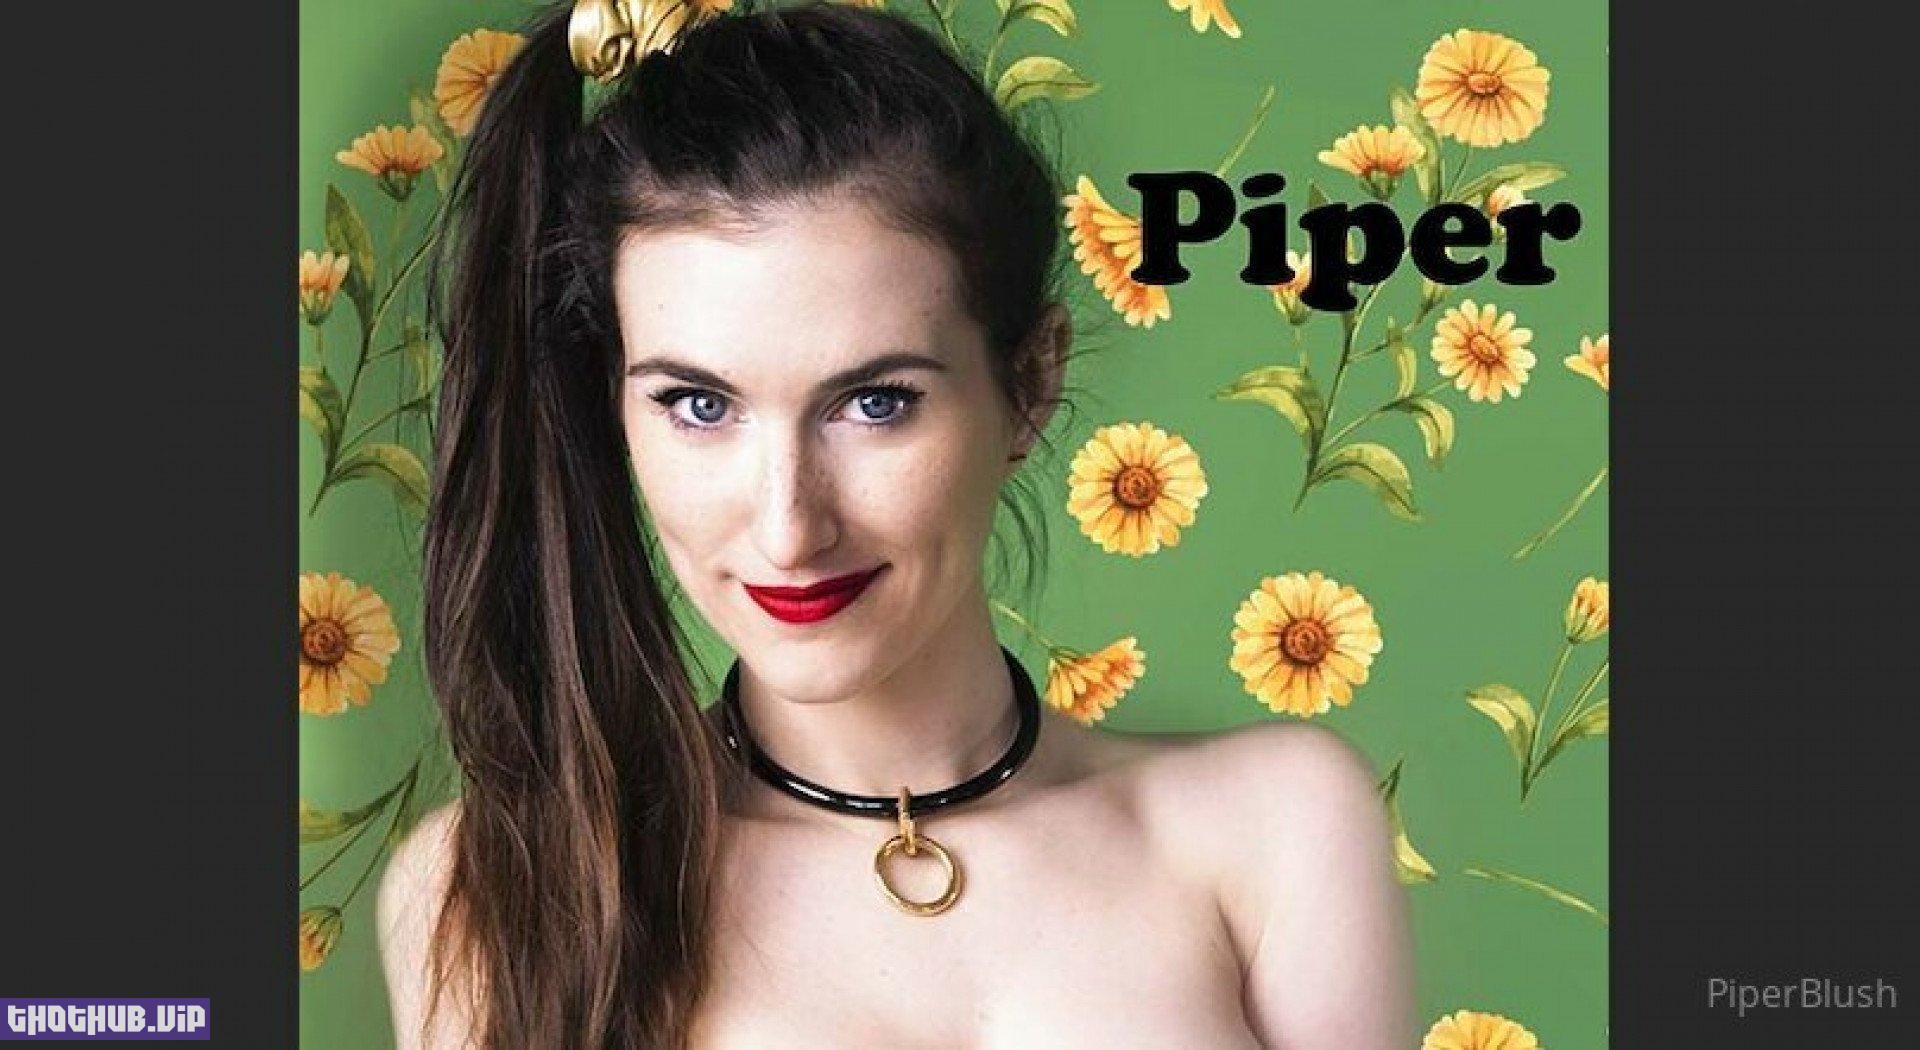 Piper Blush Free (piperblushfree) Onlyfans Leaks (24 images)